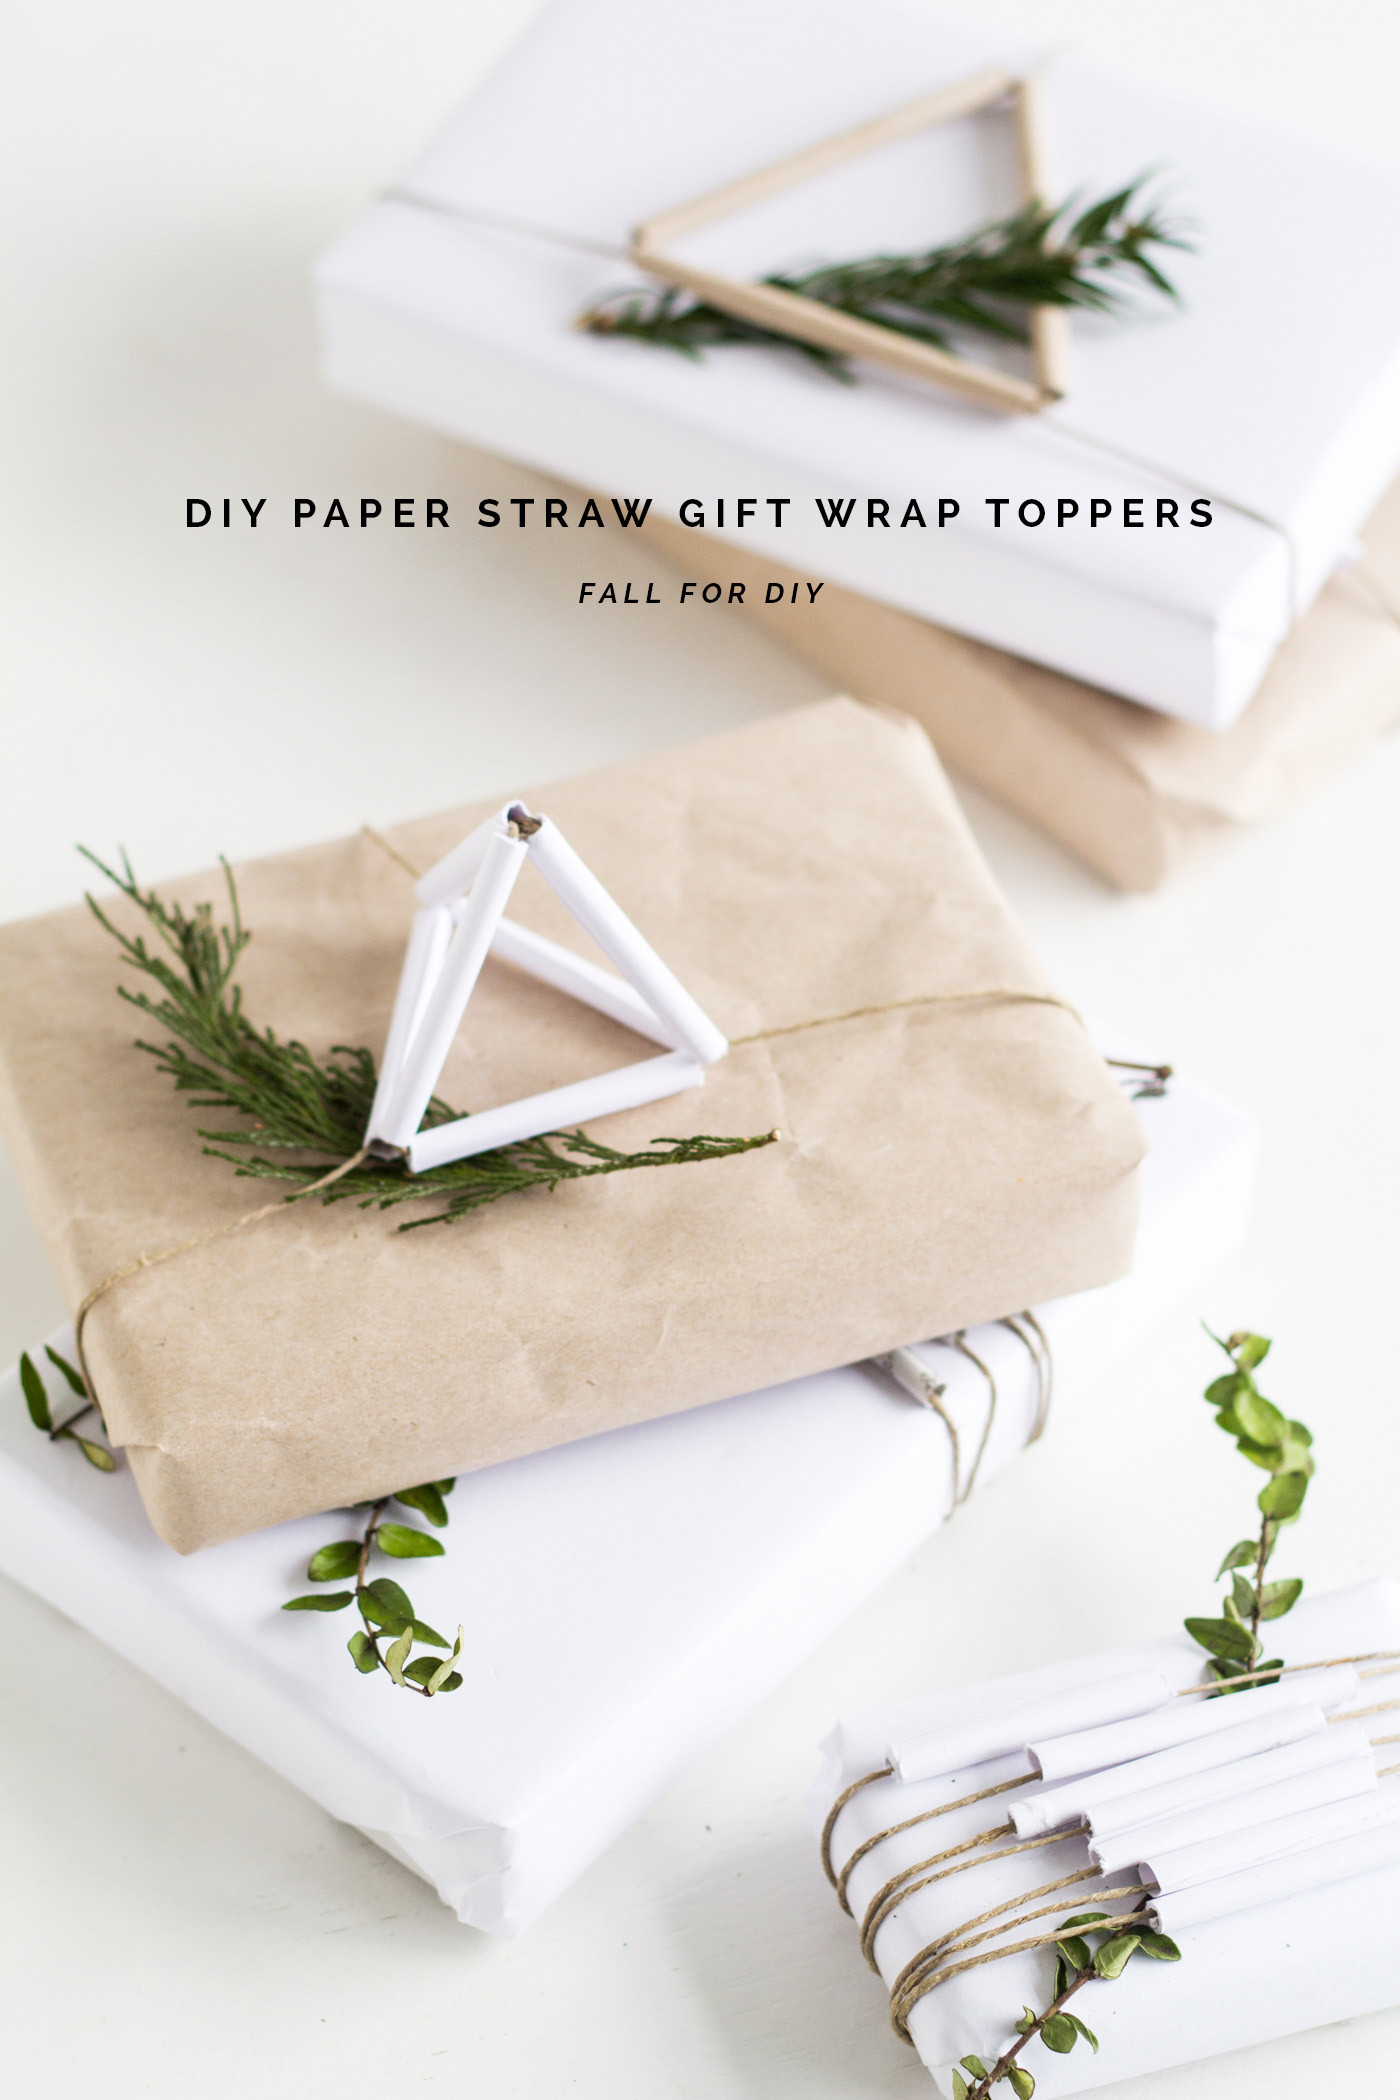 DIY Gift Wrap
 DIY Paper Straw Gift Wrap Toppers 5 Ways